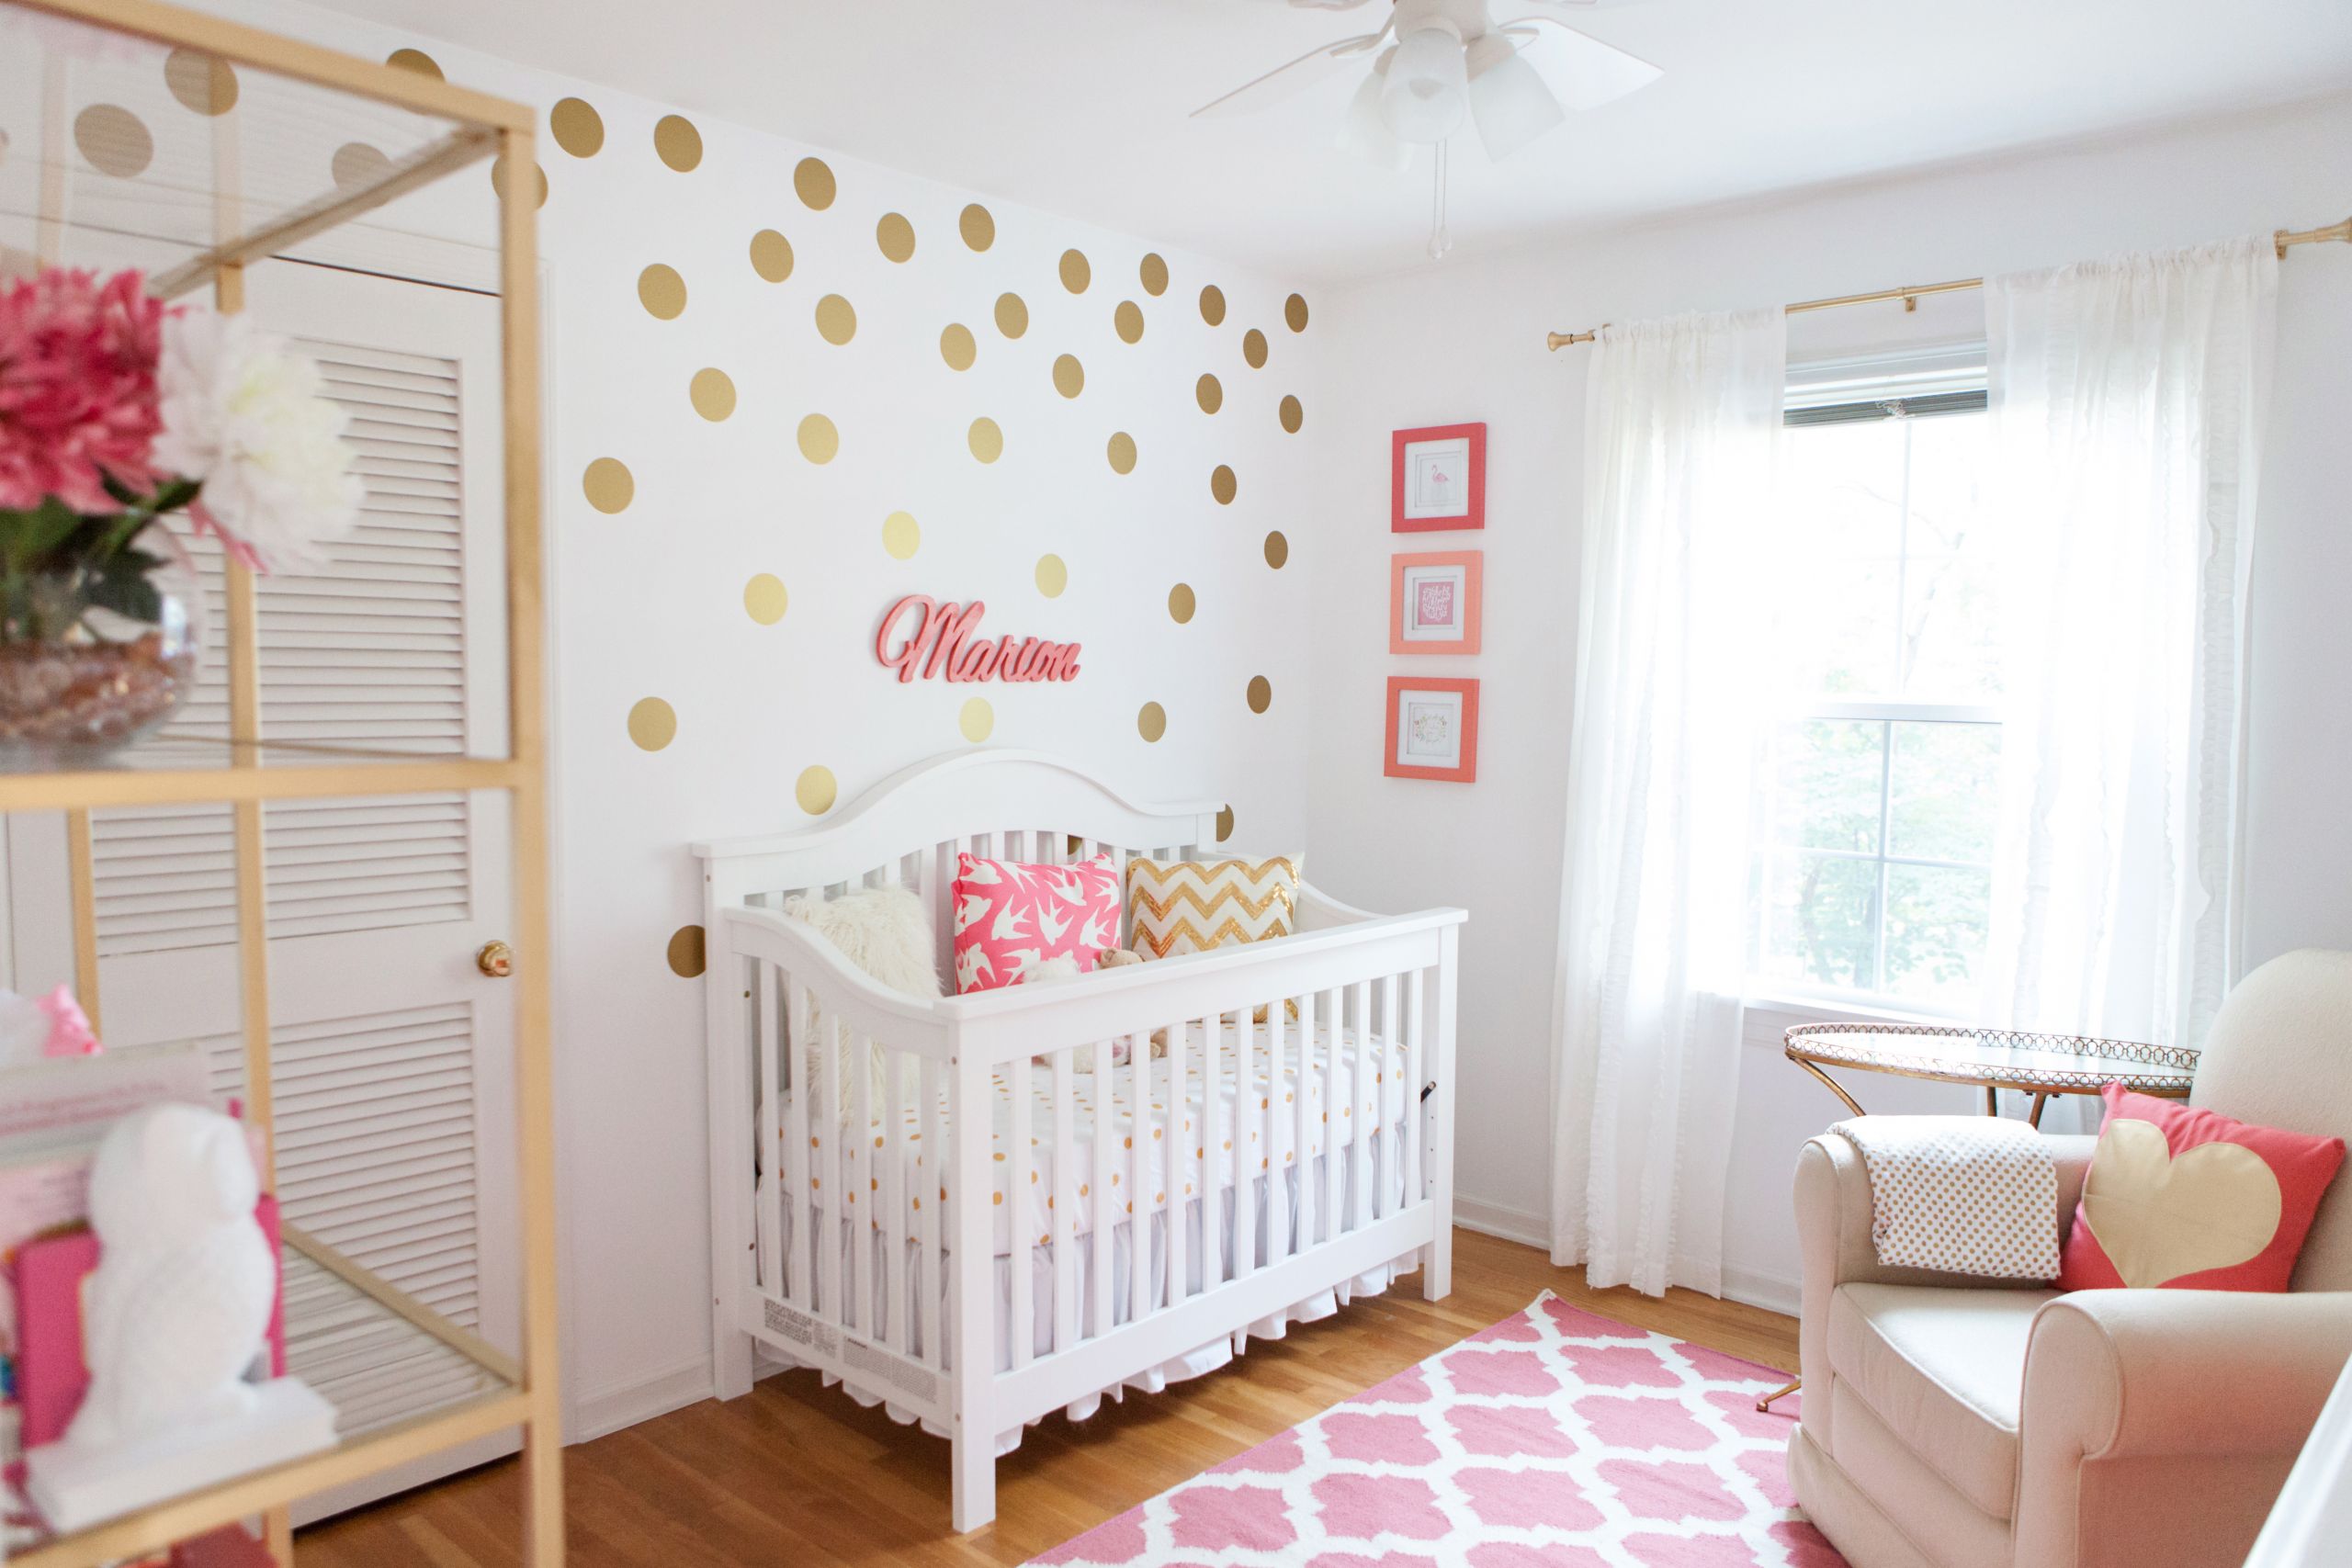 Room Decor For Baby
 Marion s Coral and Gold Polka Dot Nursery Project Nursery